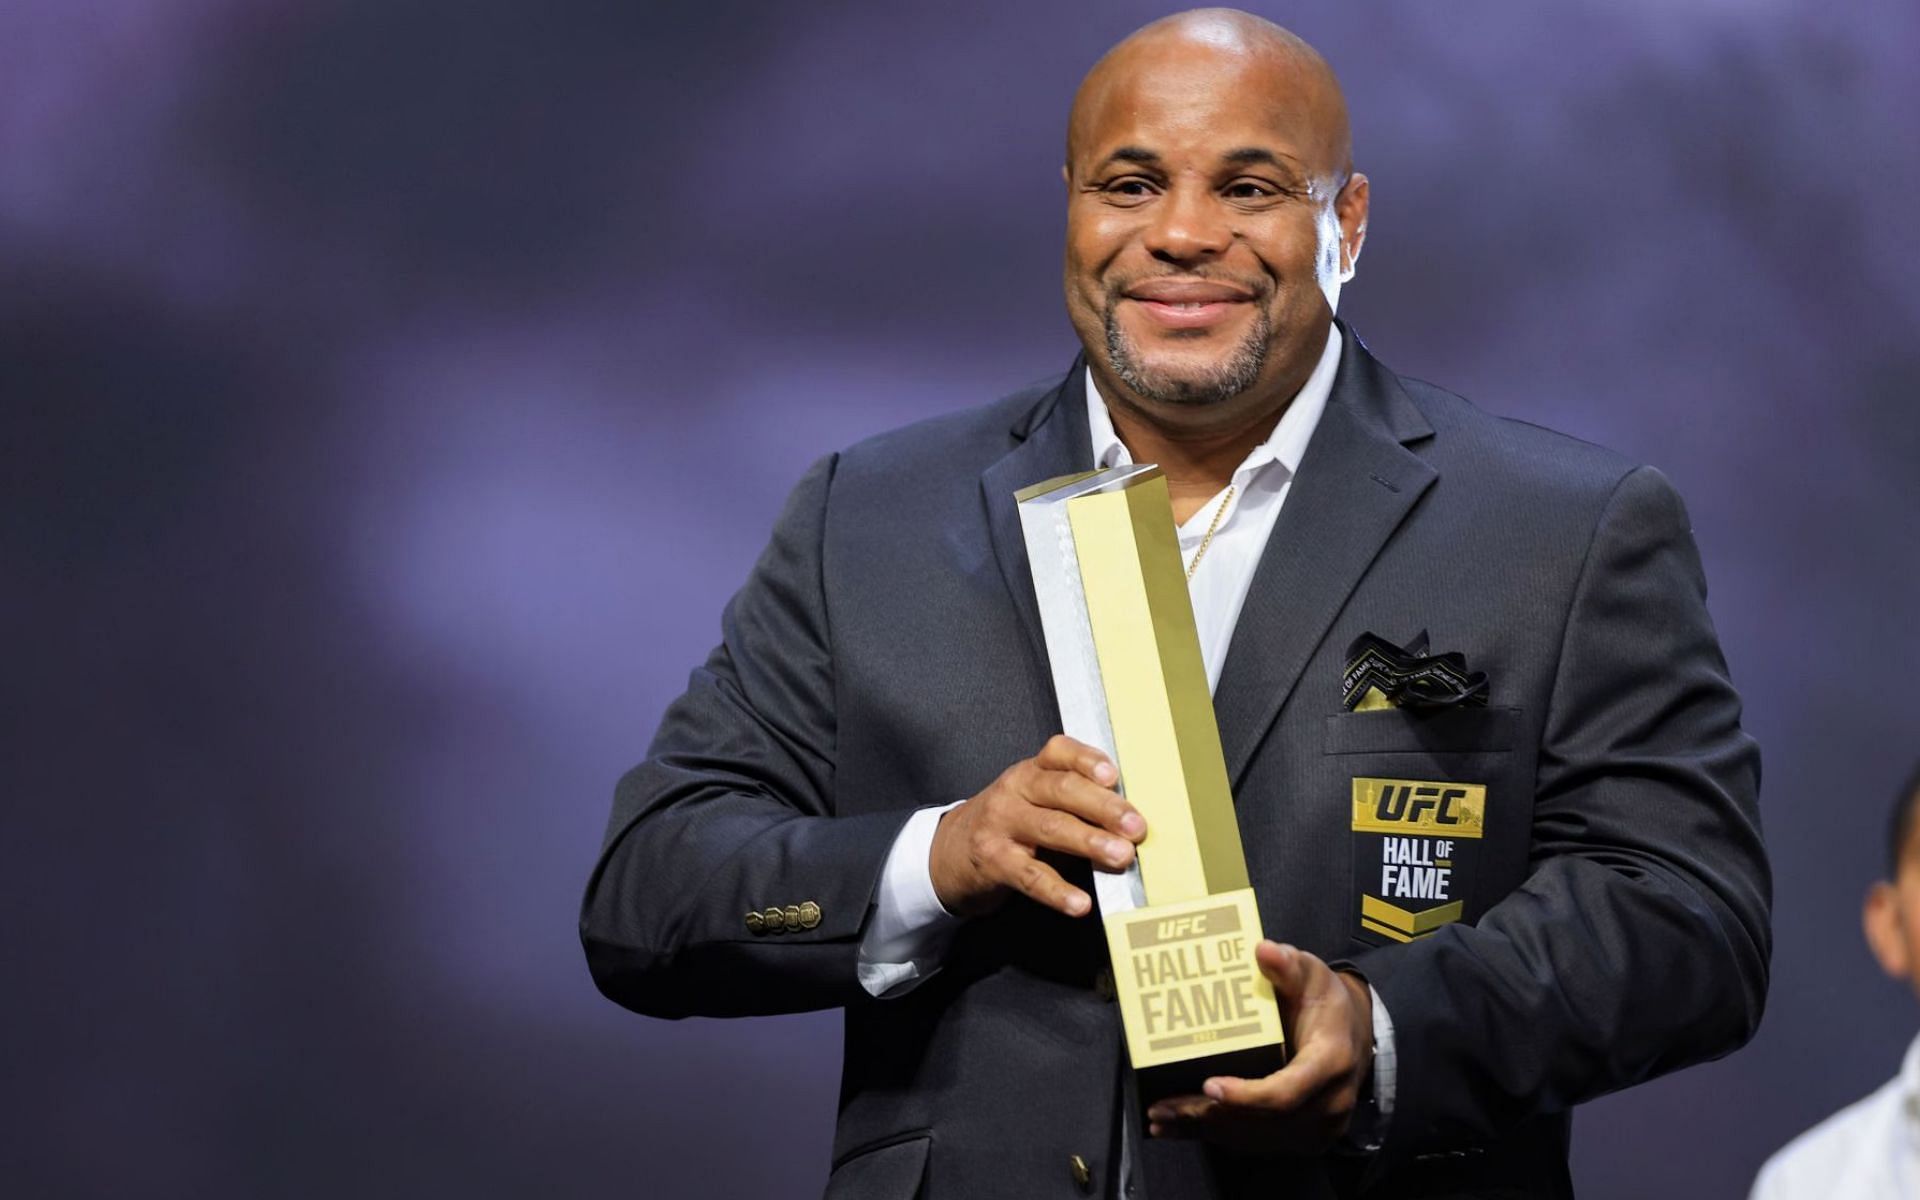 DC at UFC Hall of Fame Class of 2022 Induction Ceremony